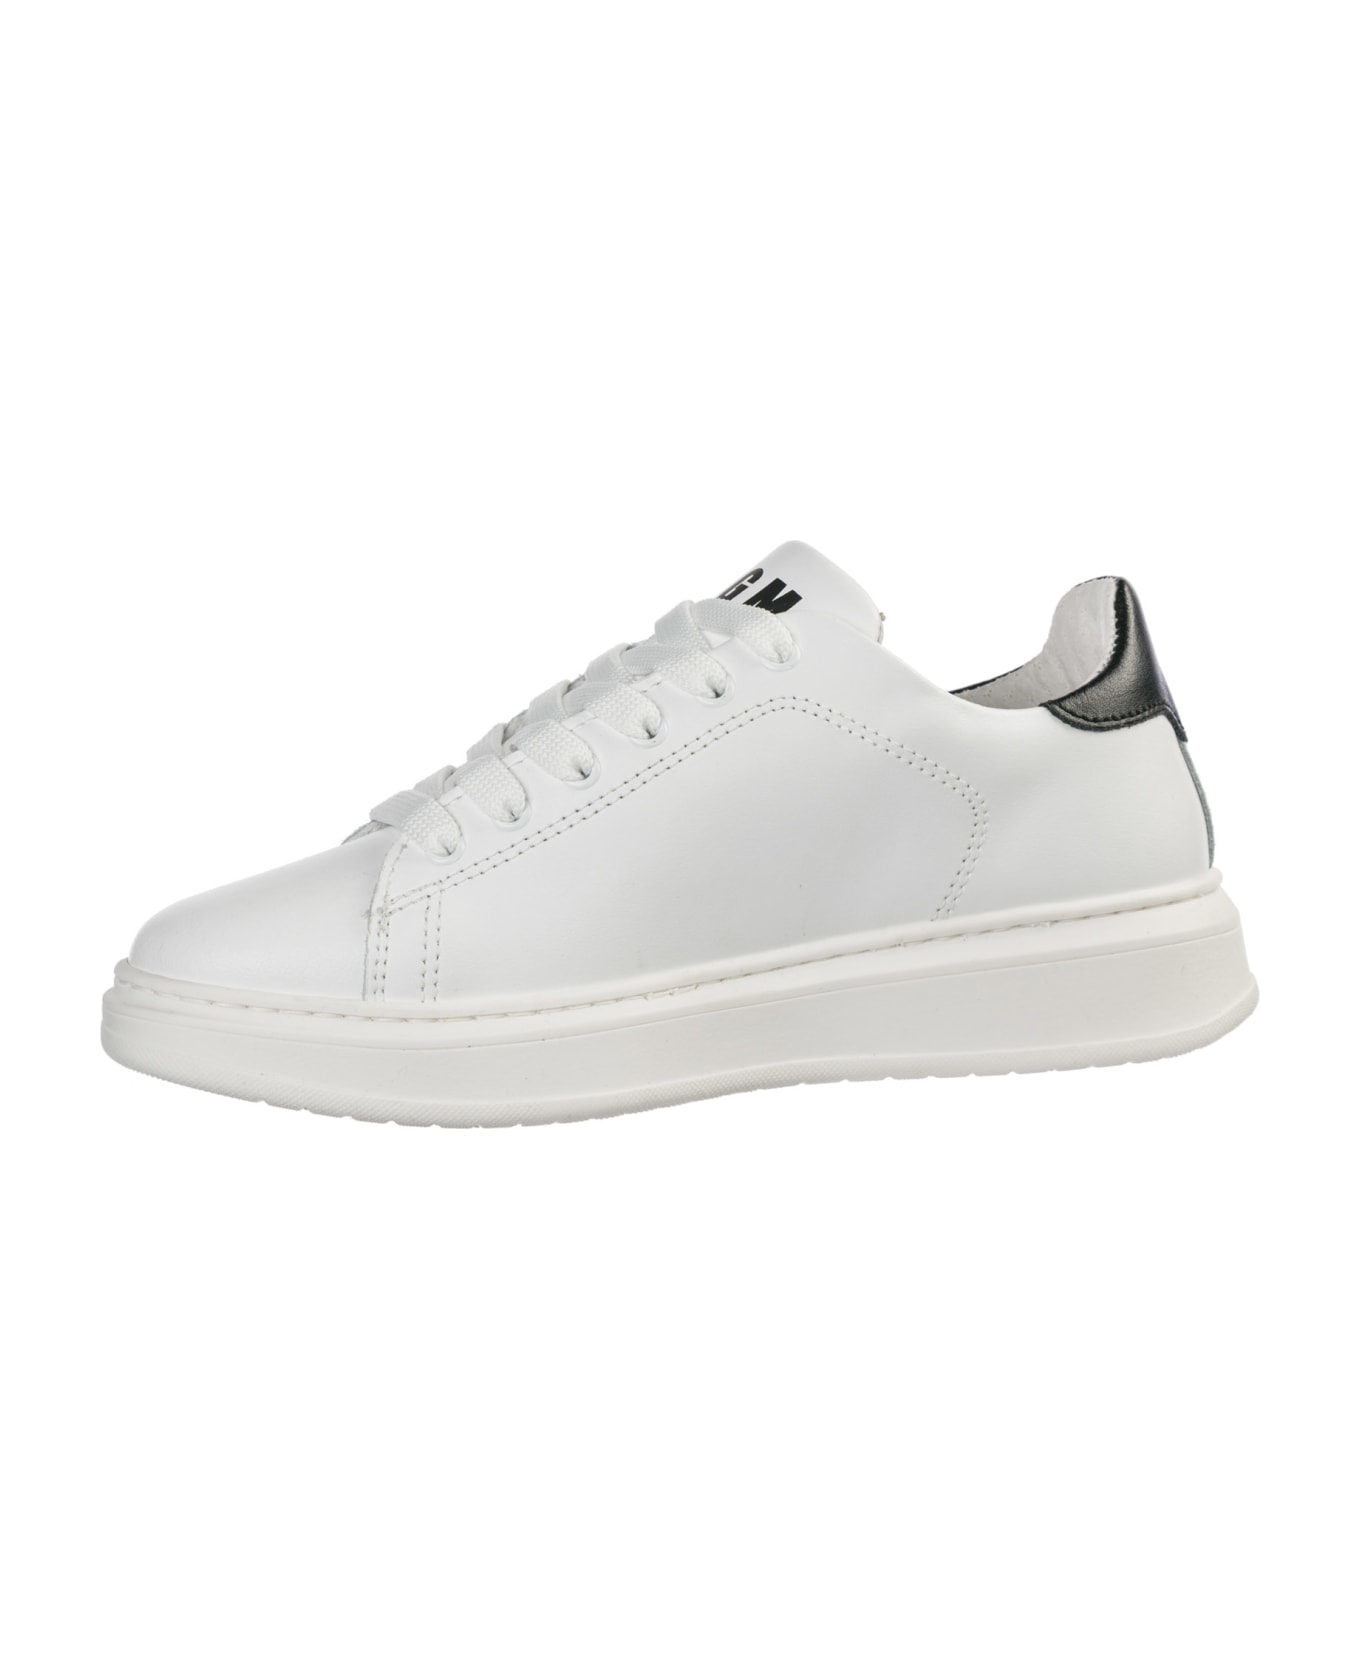 MSGM Shoes Leather Trainers Sneakers Trainer | italist, ALWAYS LIKE A SALE